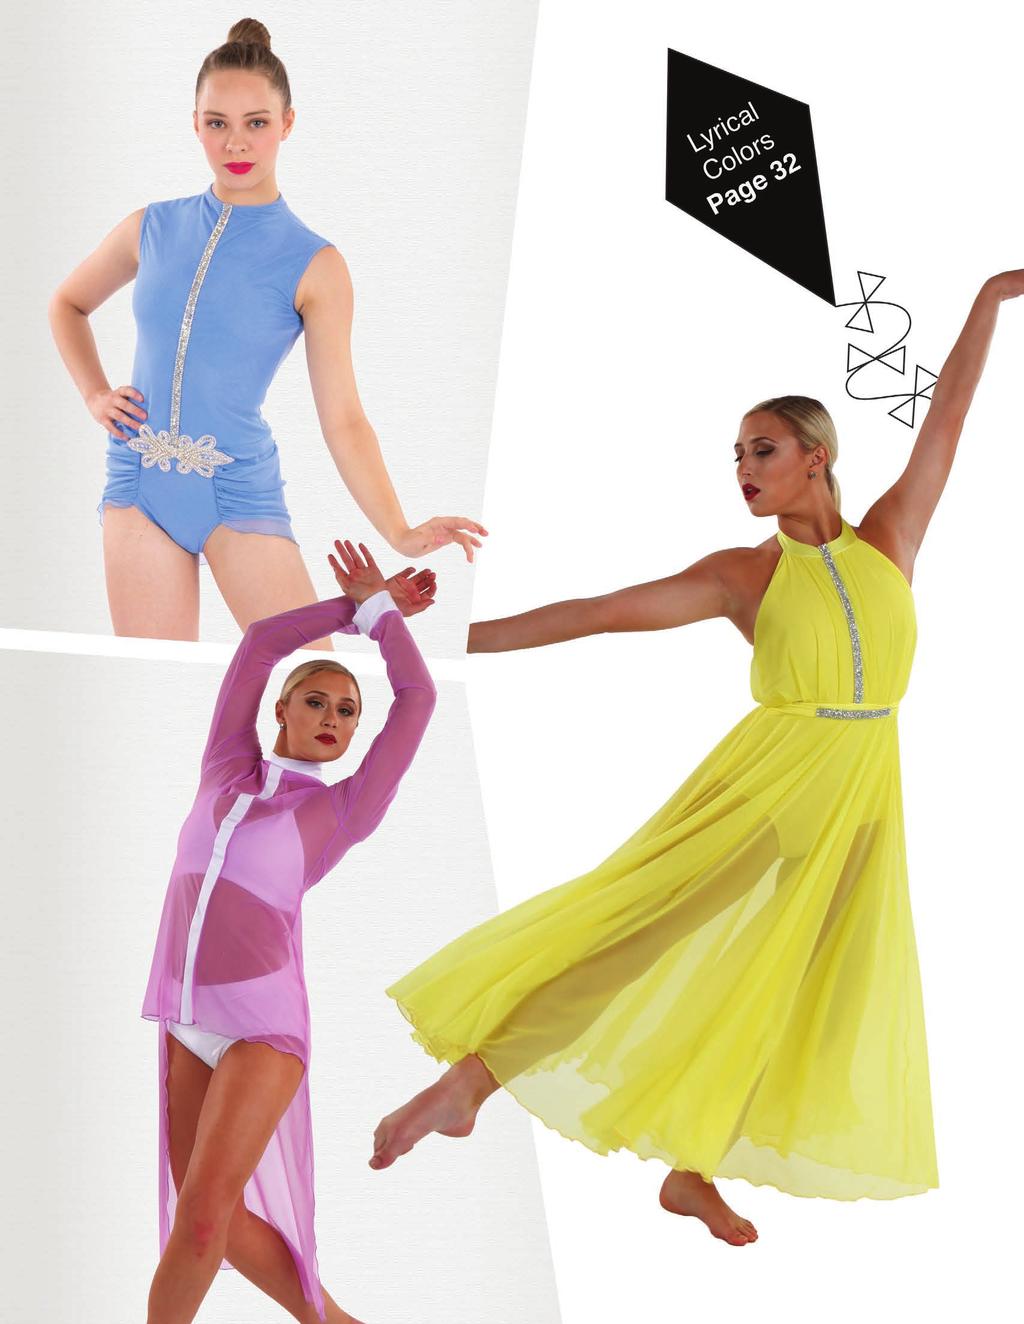 81482 LEOTARD, APP (OPT) Center front trim included Shown: Periwinkle 81478 DRESS RH trim included